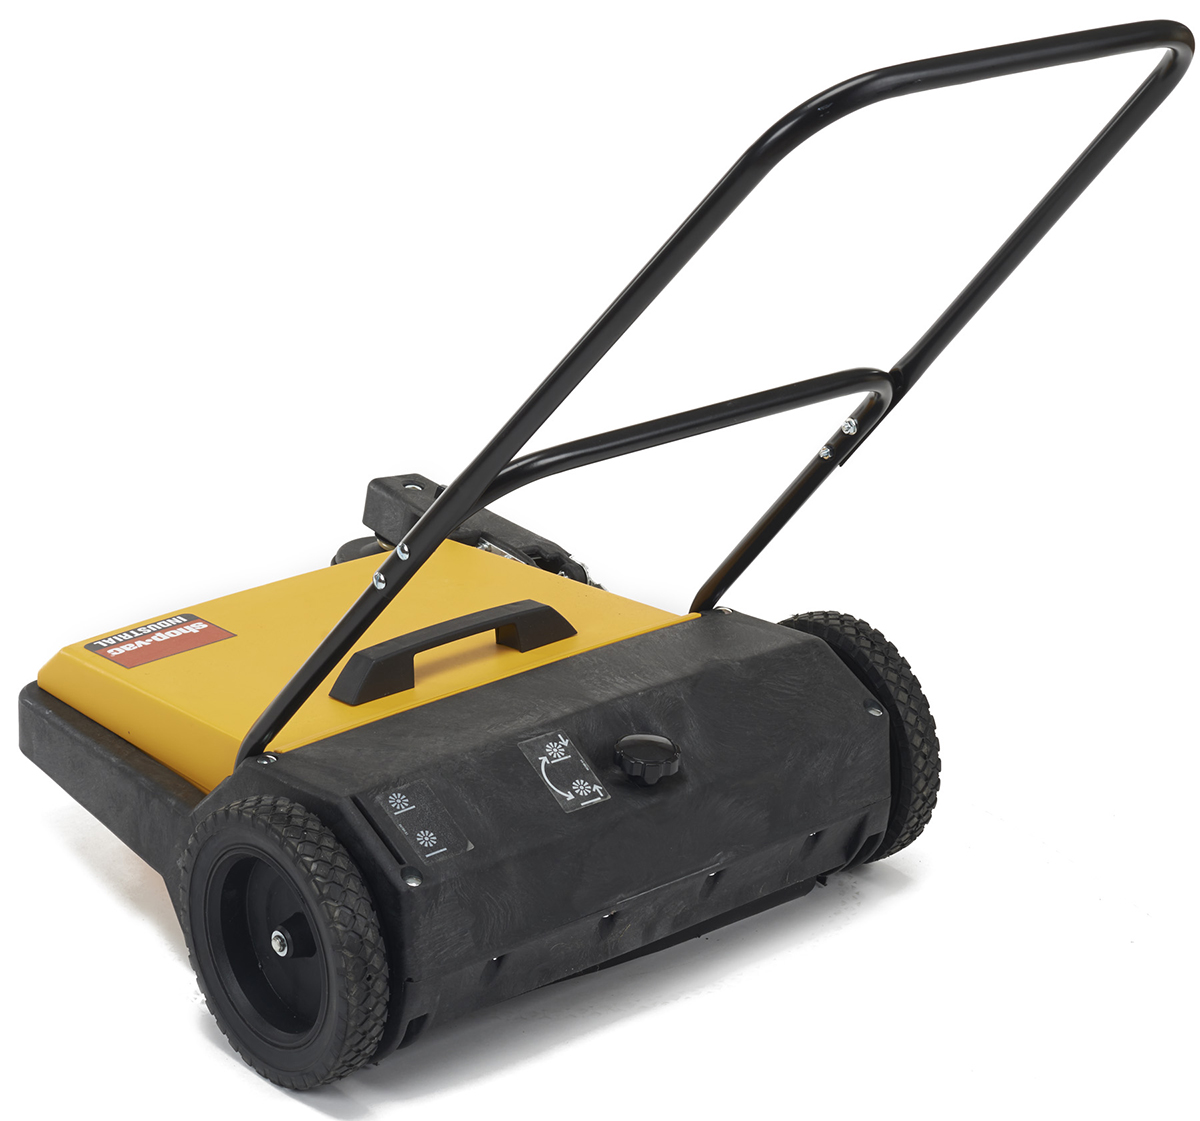 Shop-Vac Industrial Push Sweeper, 3050010 - image 3 of 7